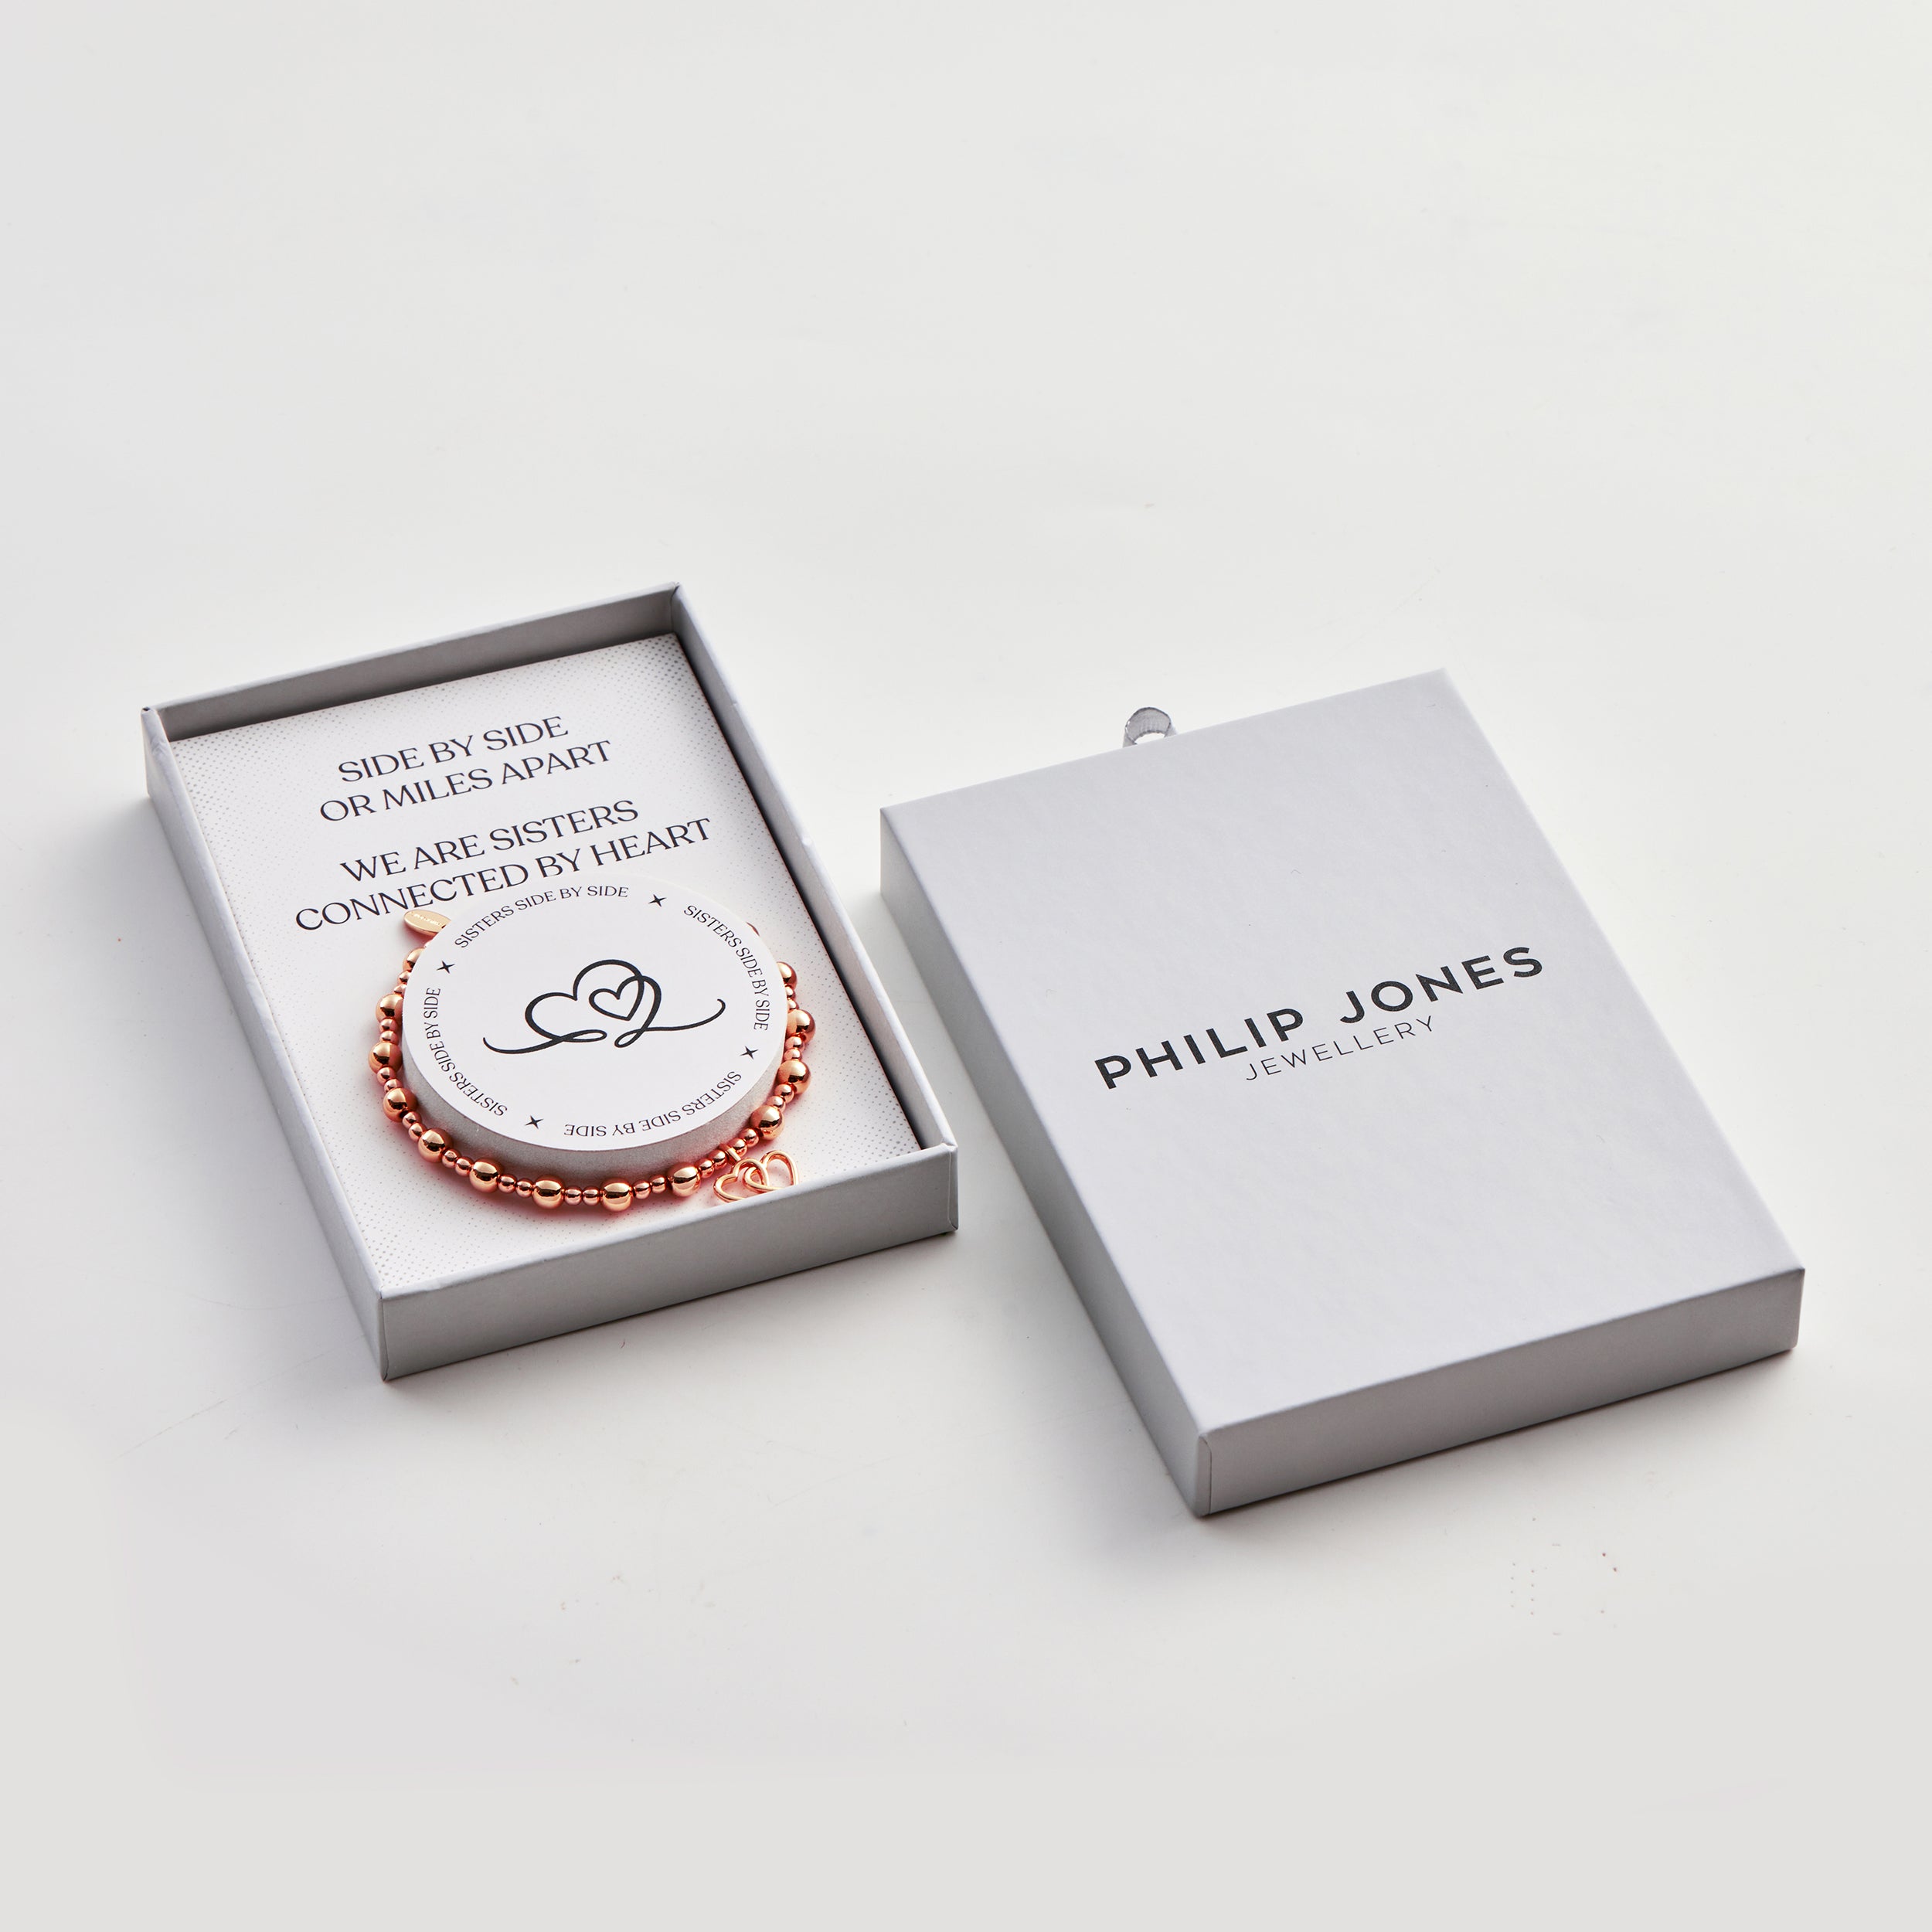 Rose Gold Plated Sister Quote Stretch Bracelet with Gift Box